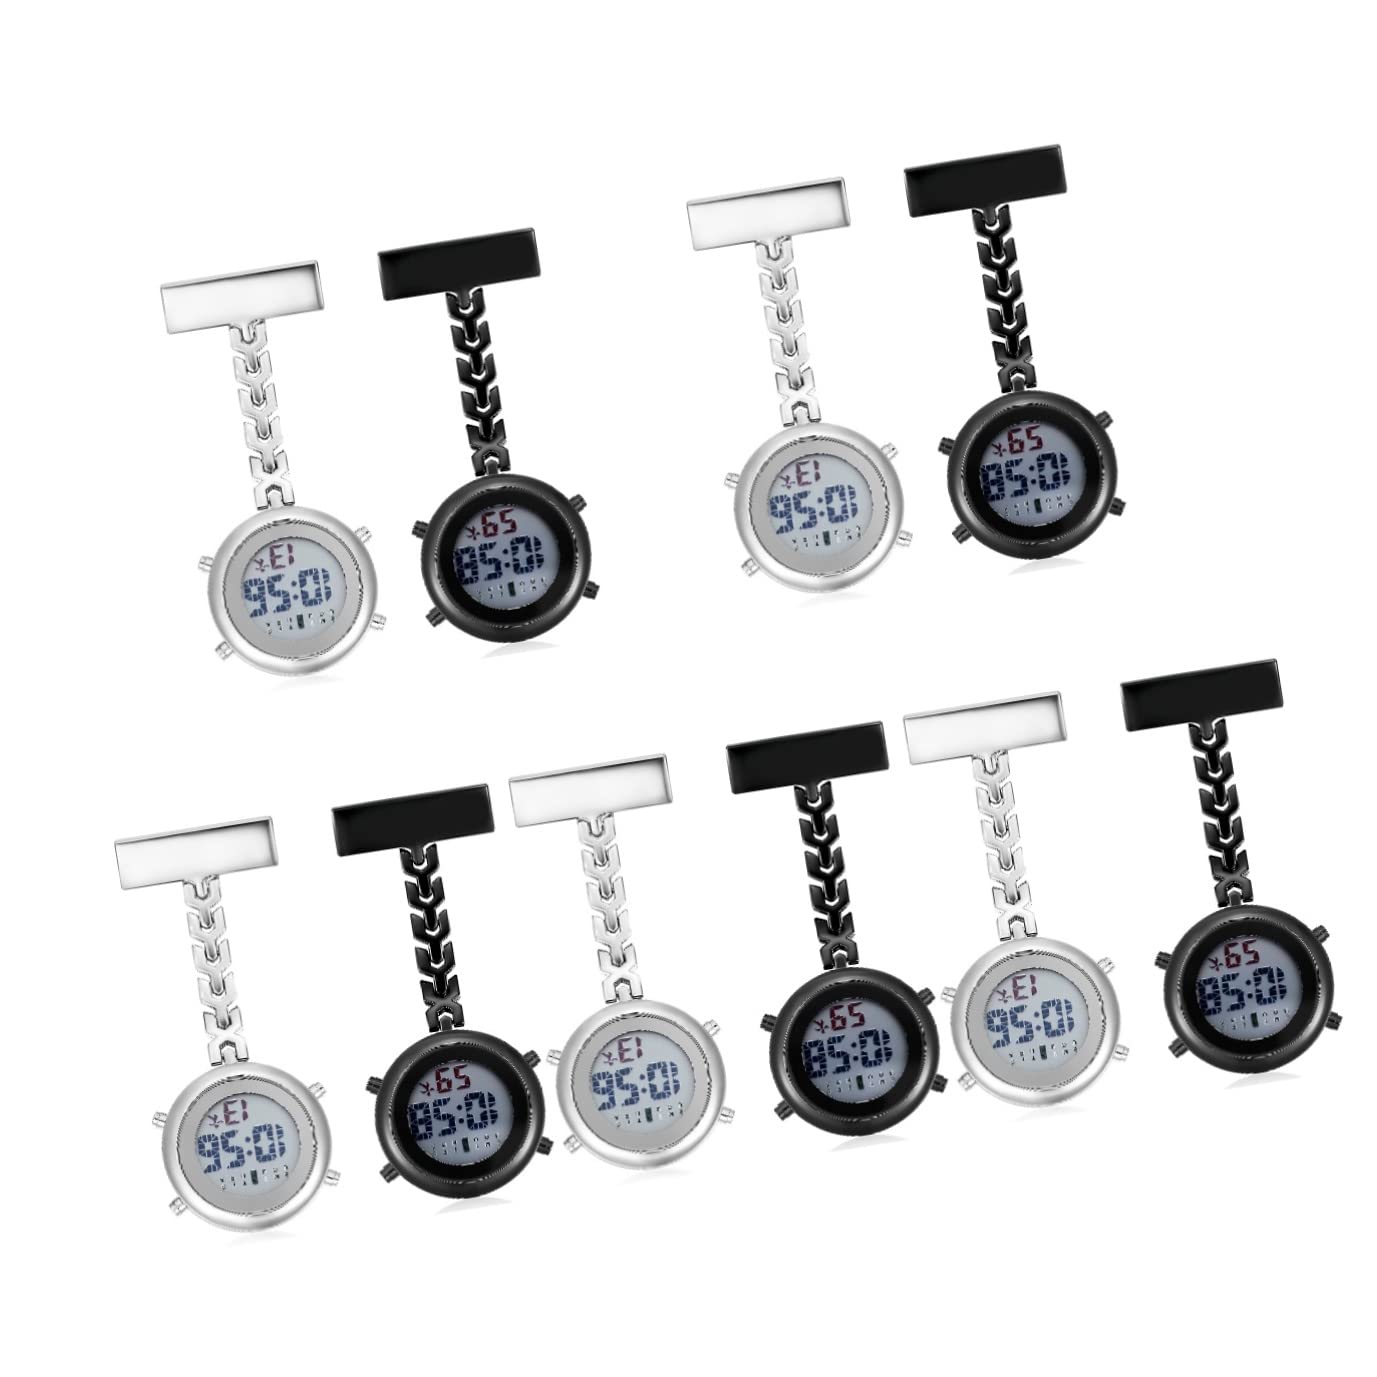 UKCOCO Black Watch 10 pcs Hanging Watches Luminous Multifunctional Staff Doctors Clip for Fob On Week Badge The Clip-on Portable Nurses Nursing Doctor Pin-on Small Glow Nurse Digital Digital Watch